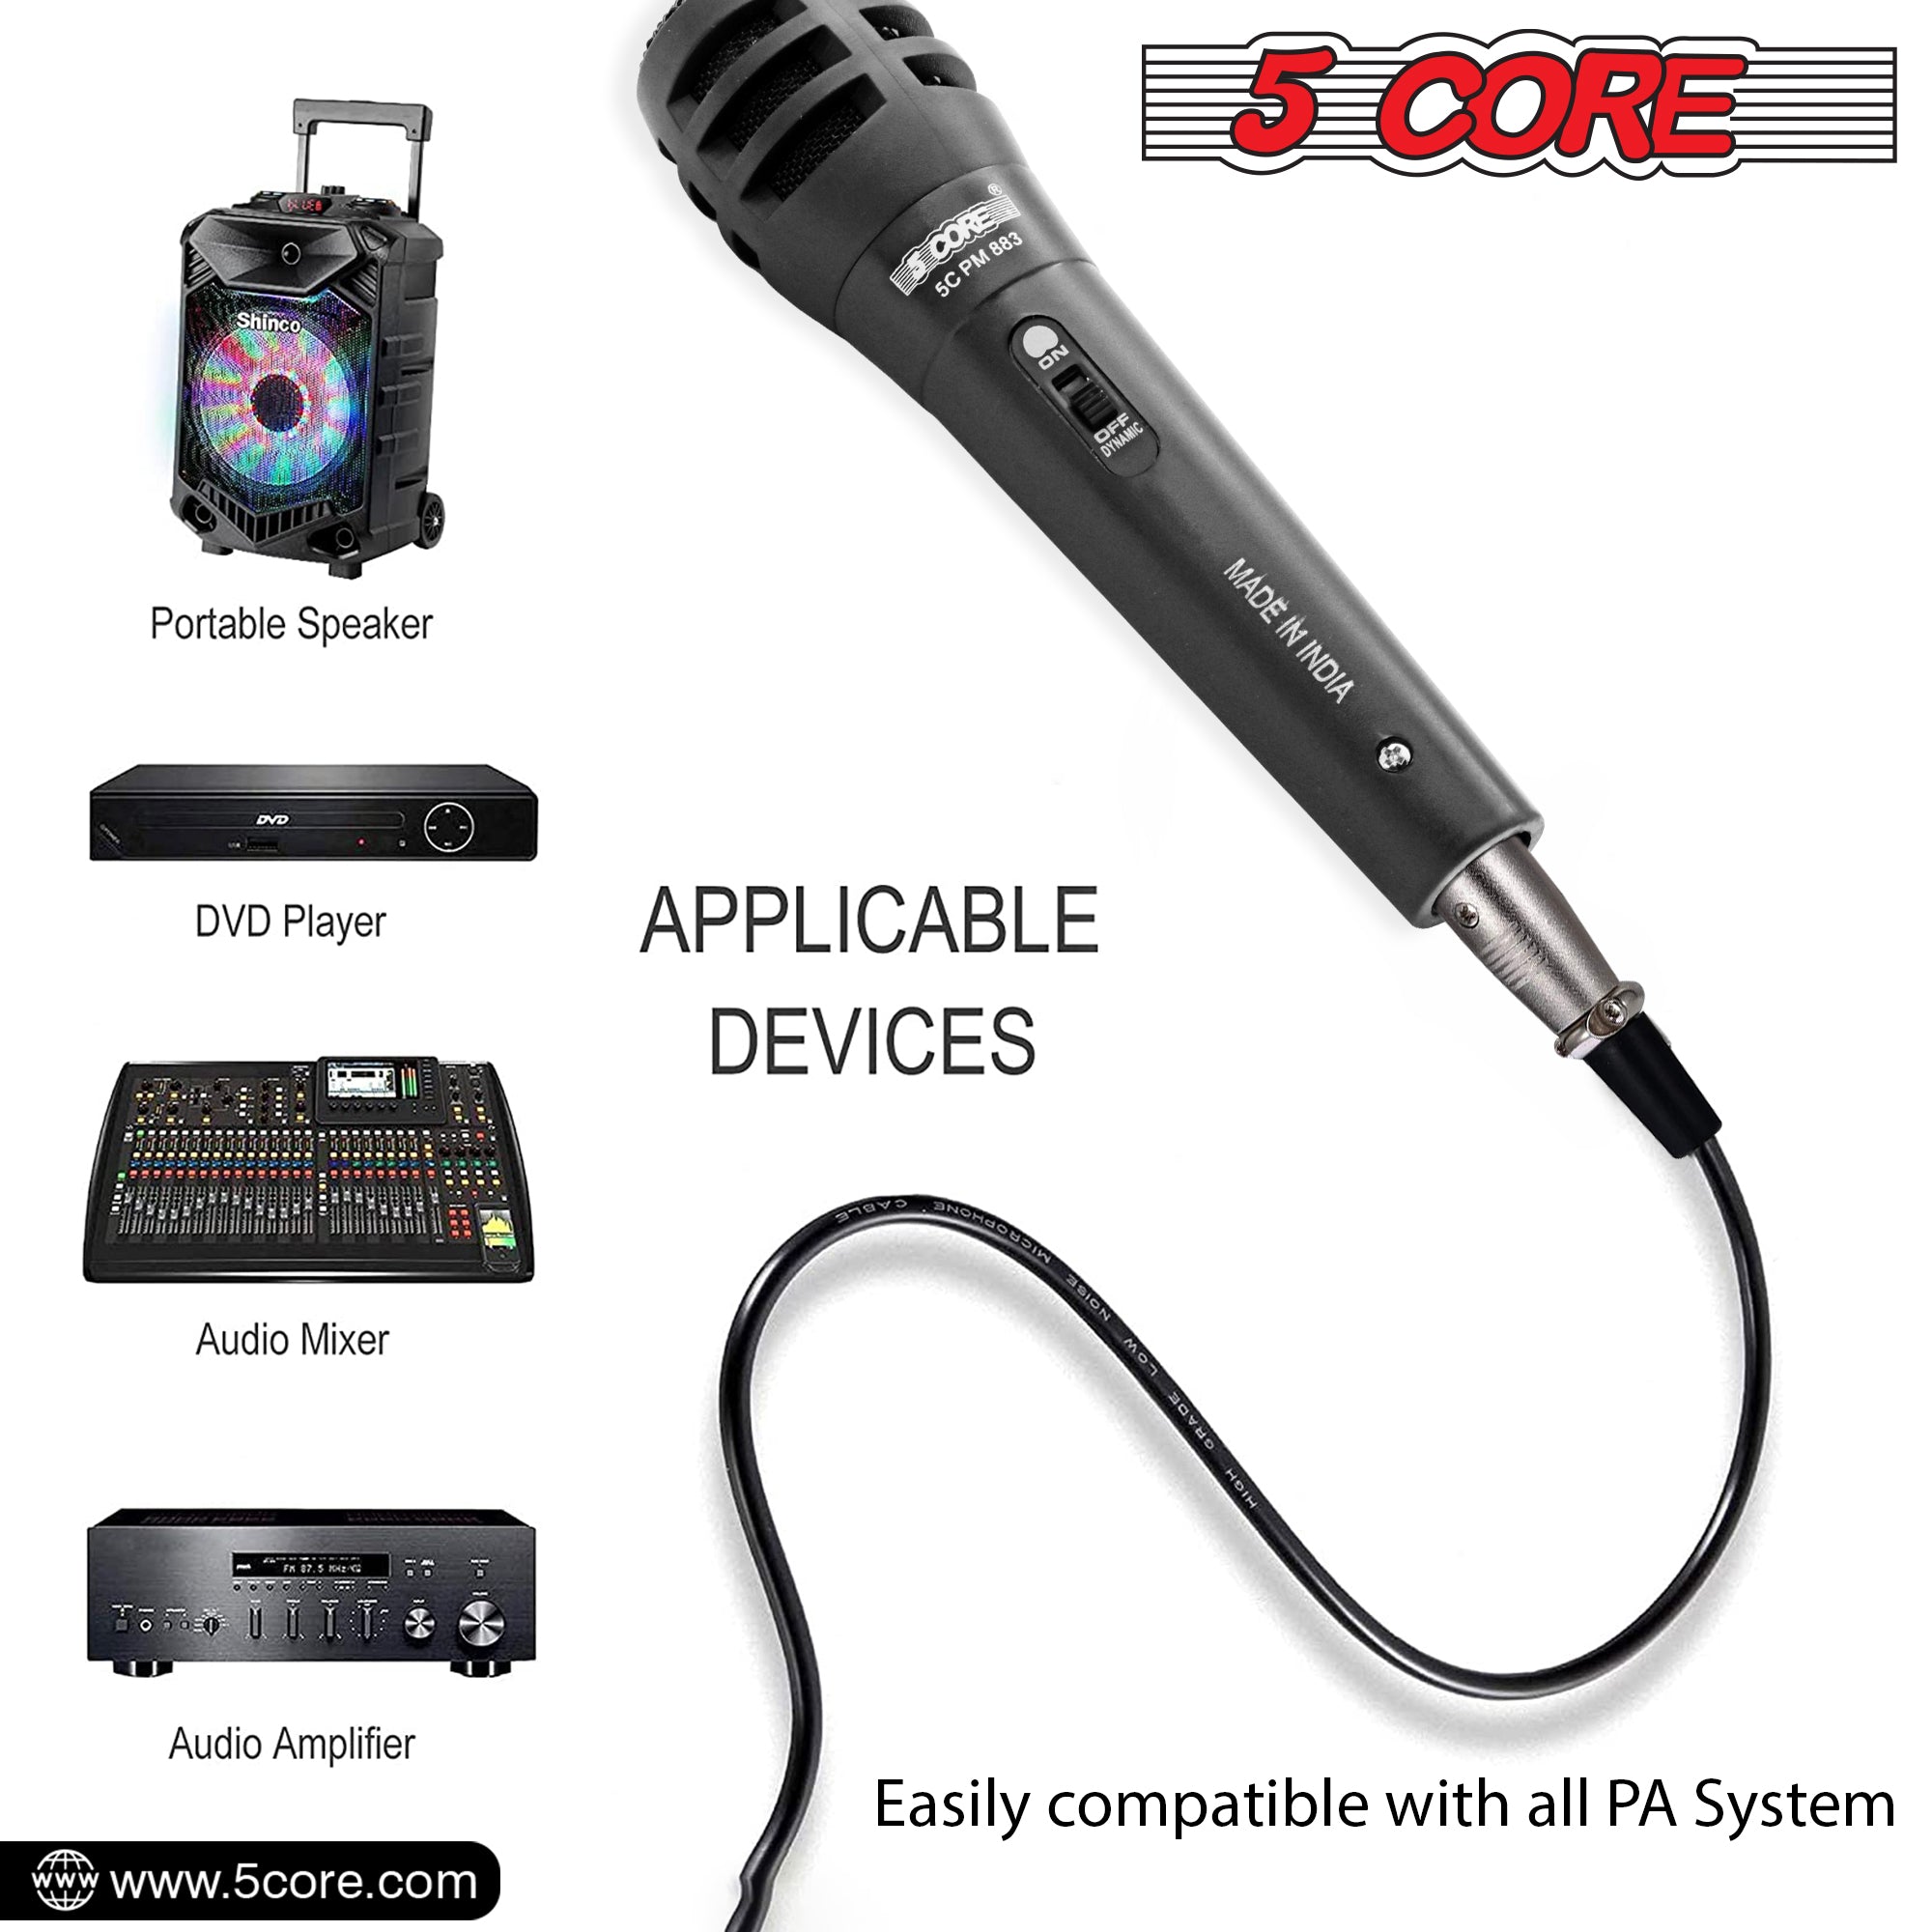 Elevate Your Singing Performance with the 5 Core PM-883 Karaoke Mic